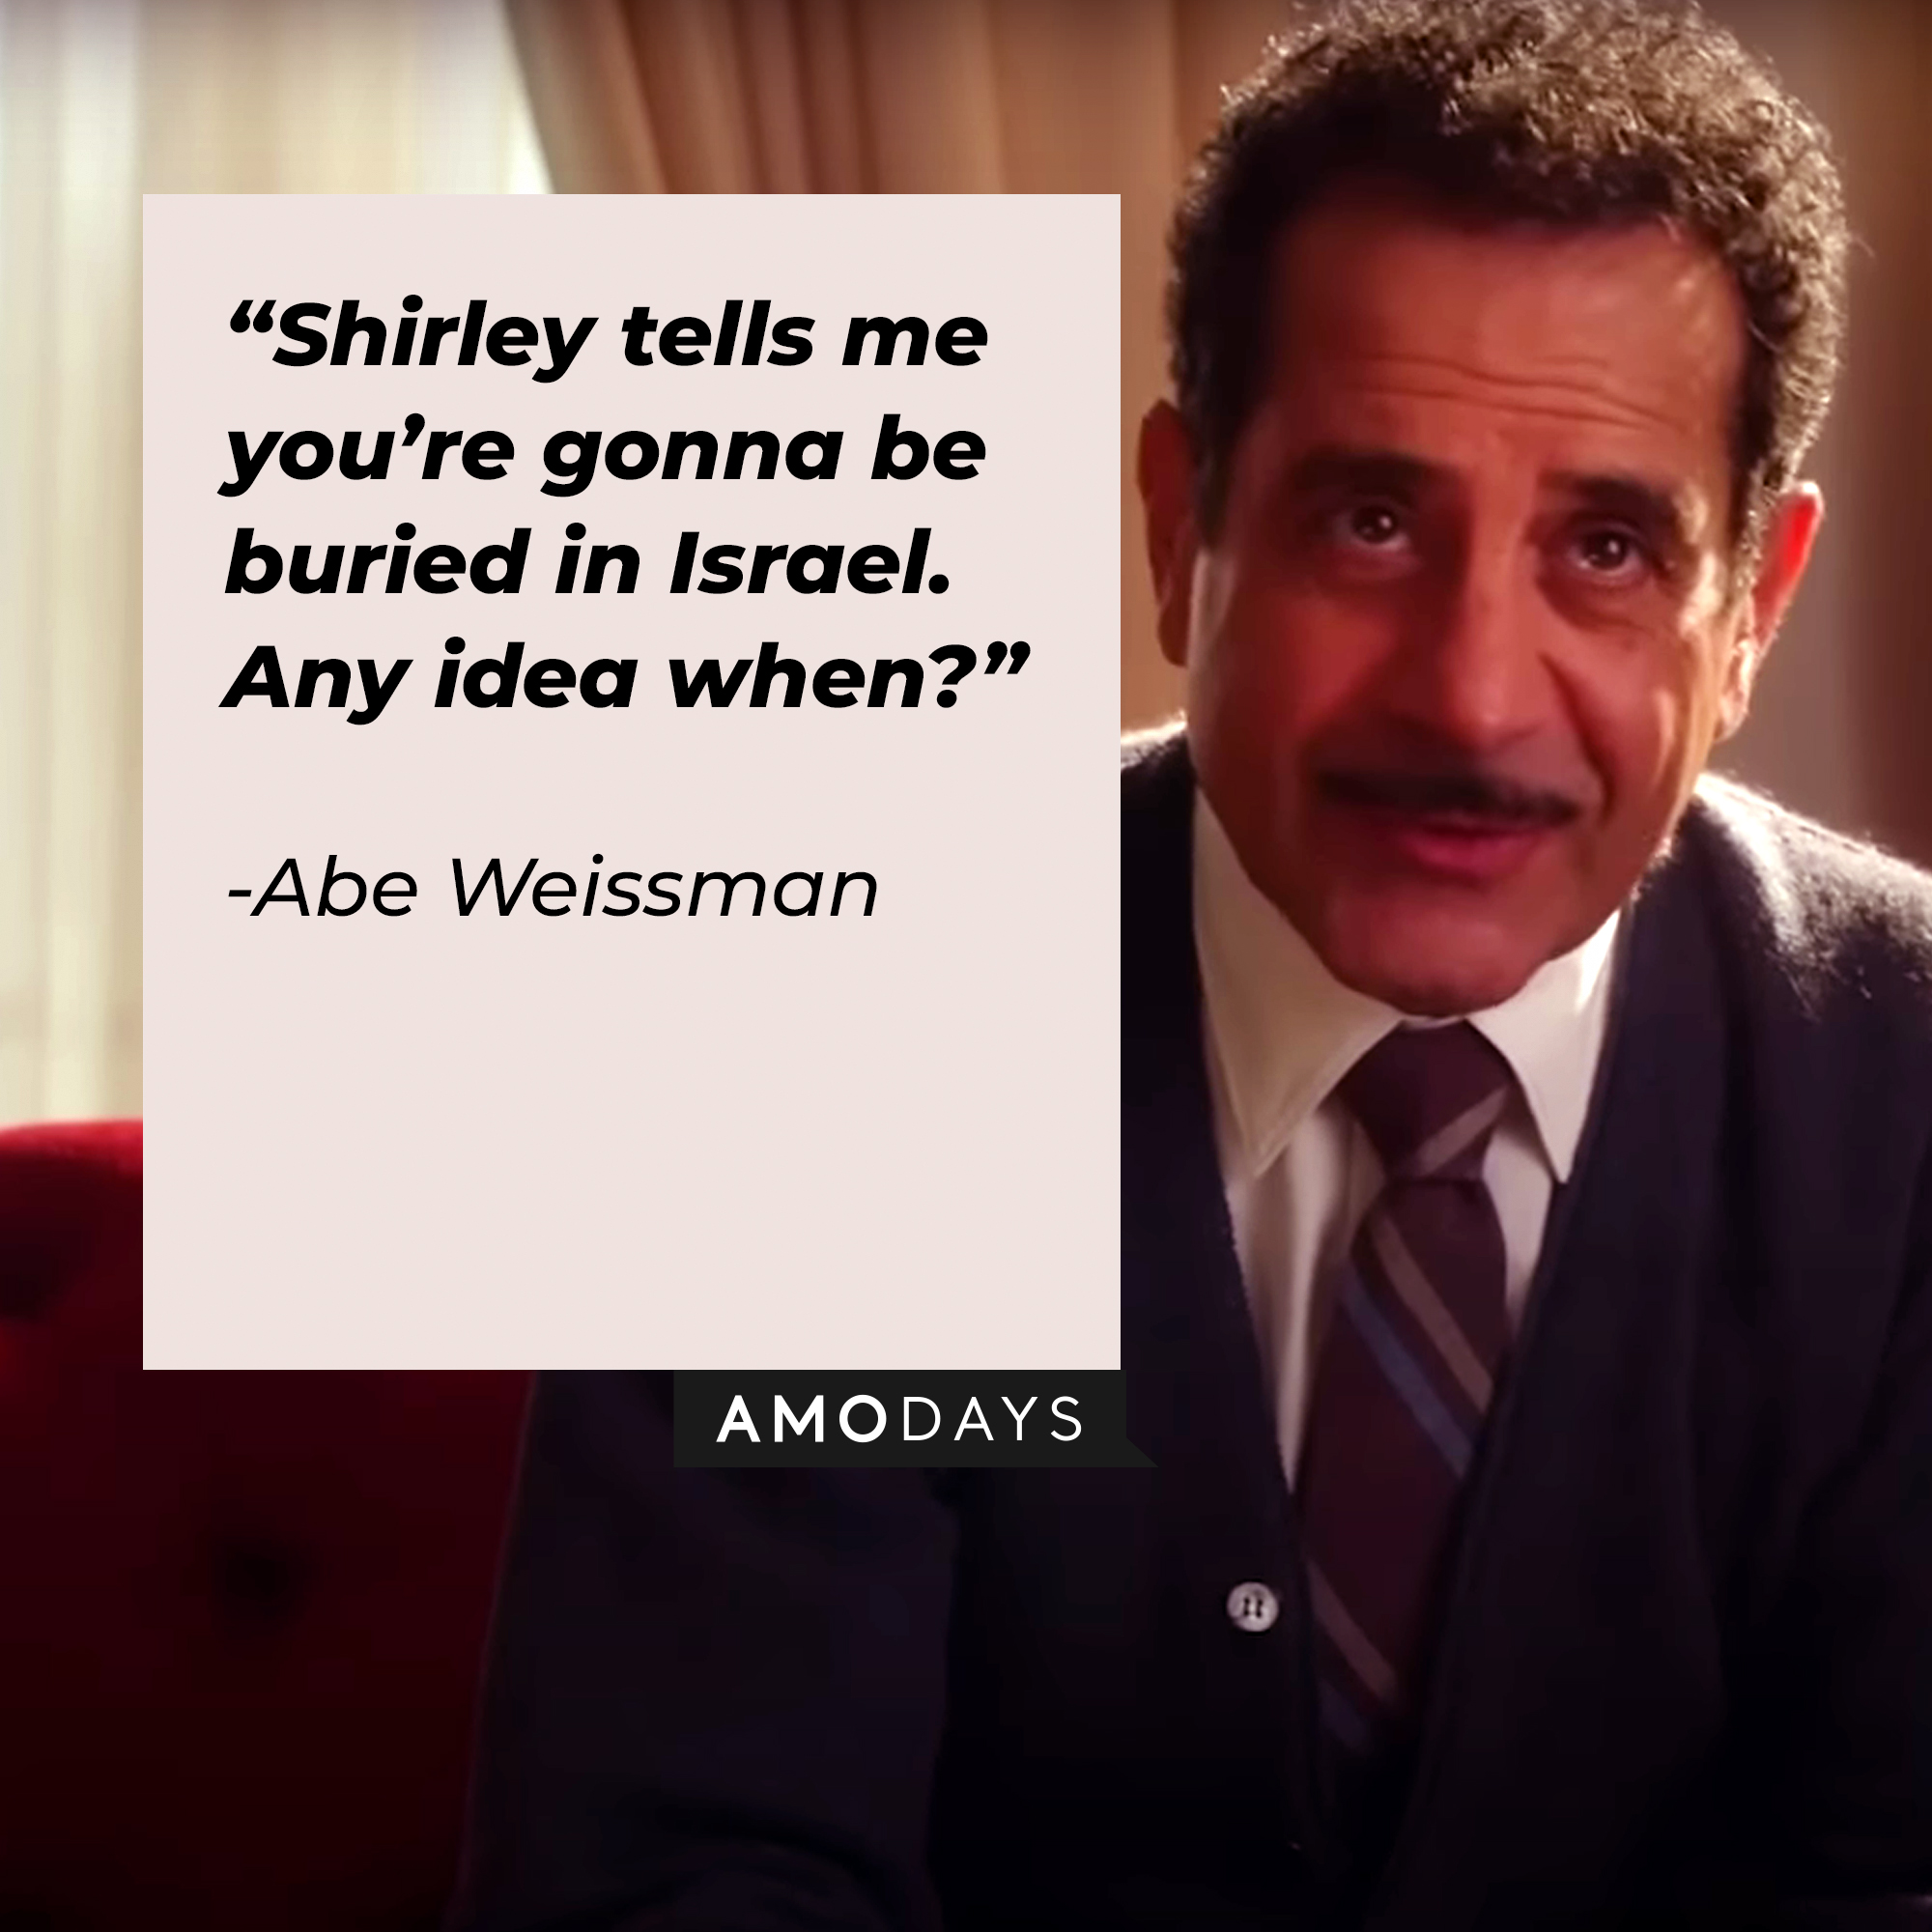 Abe Weissman, with his quote: “Shirley tells me you’re gonna be buried in Israel. Any idea when?” | Source: youtube.com/PrimeVideoUK